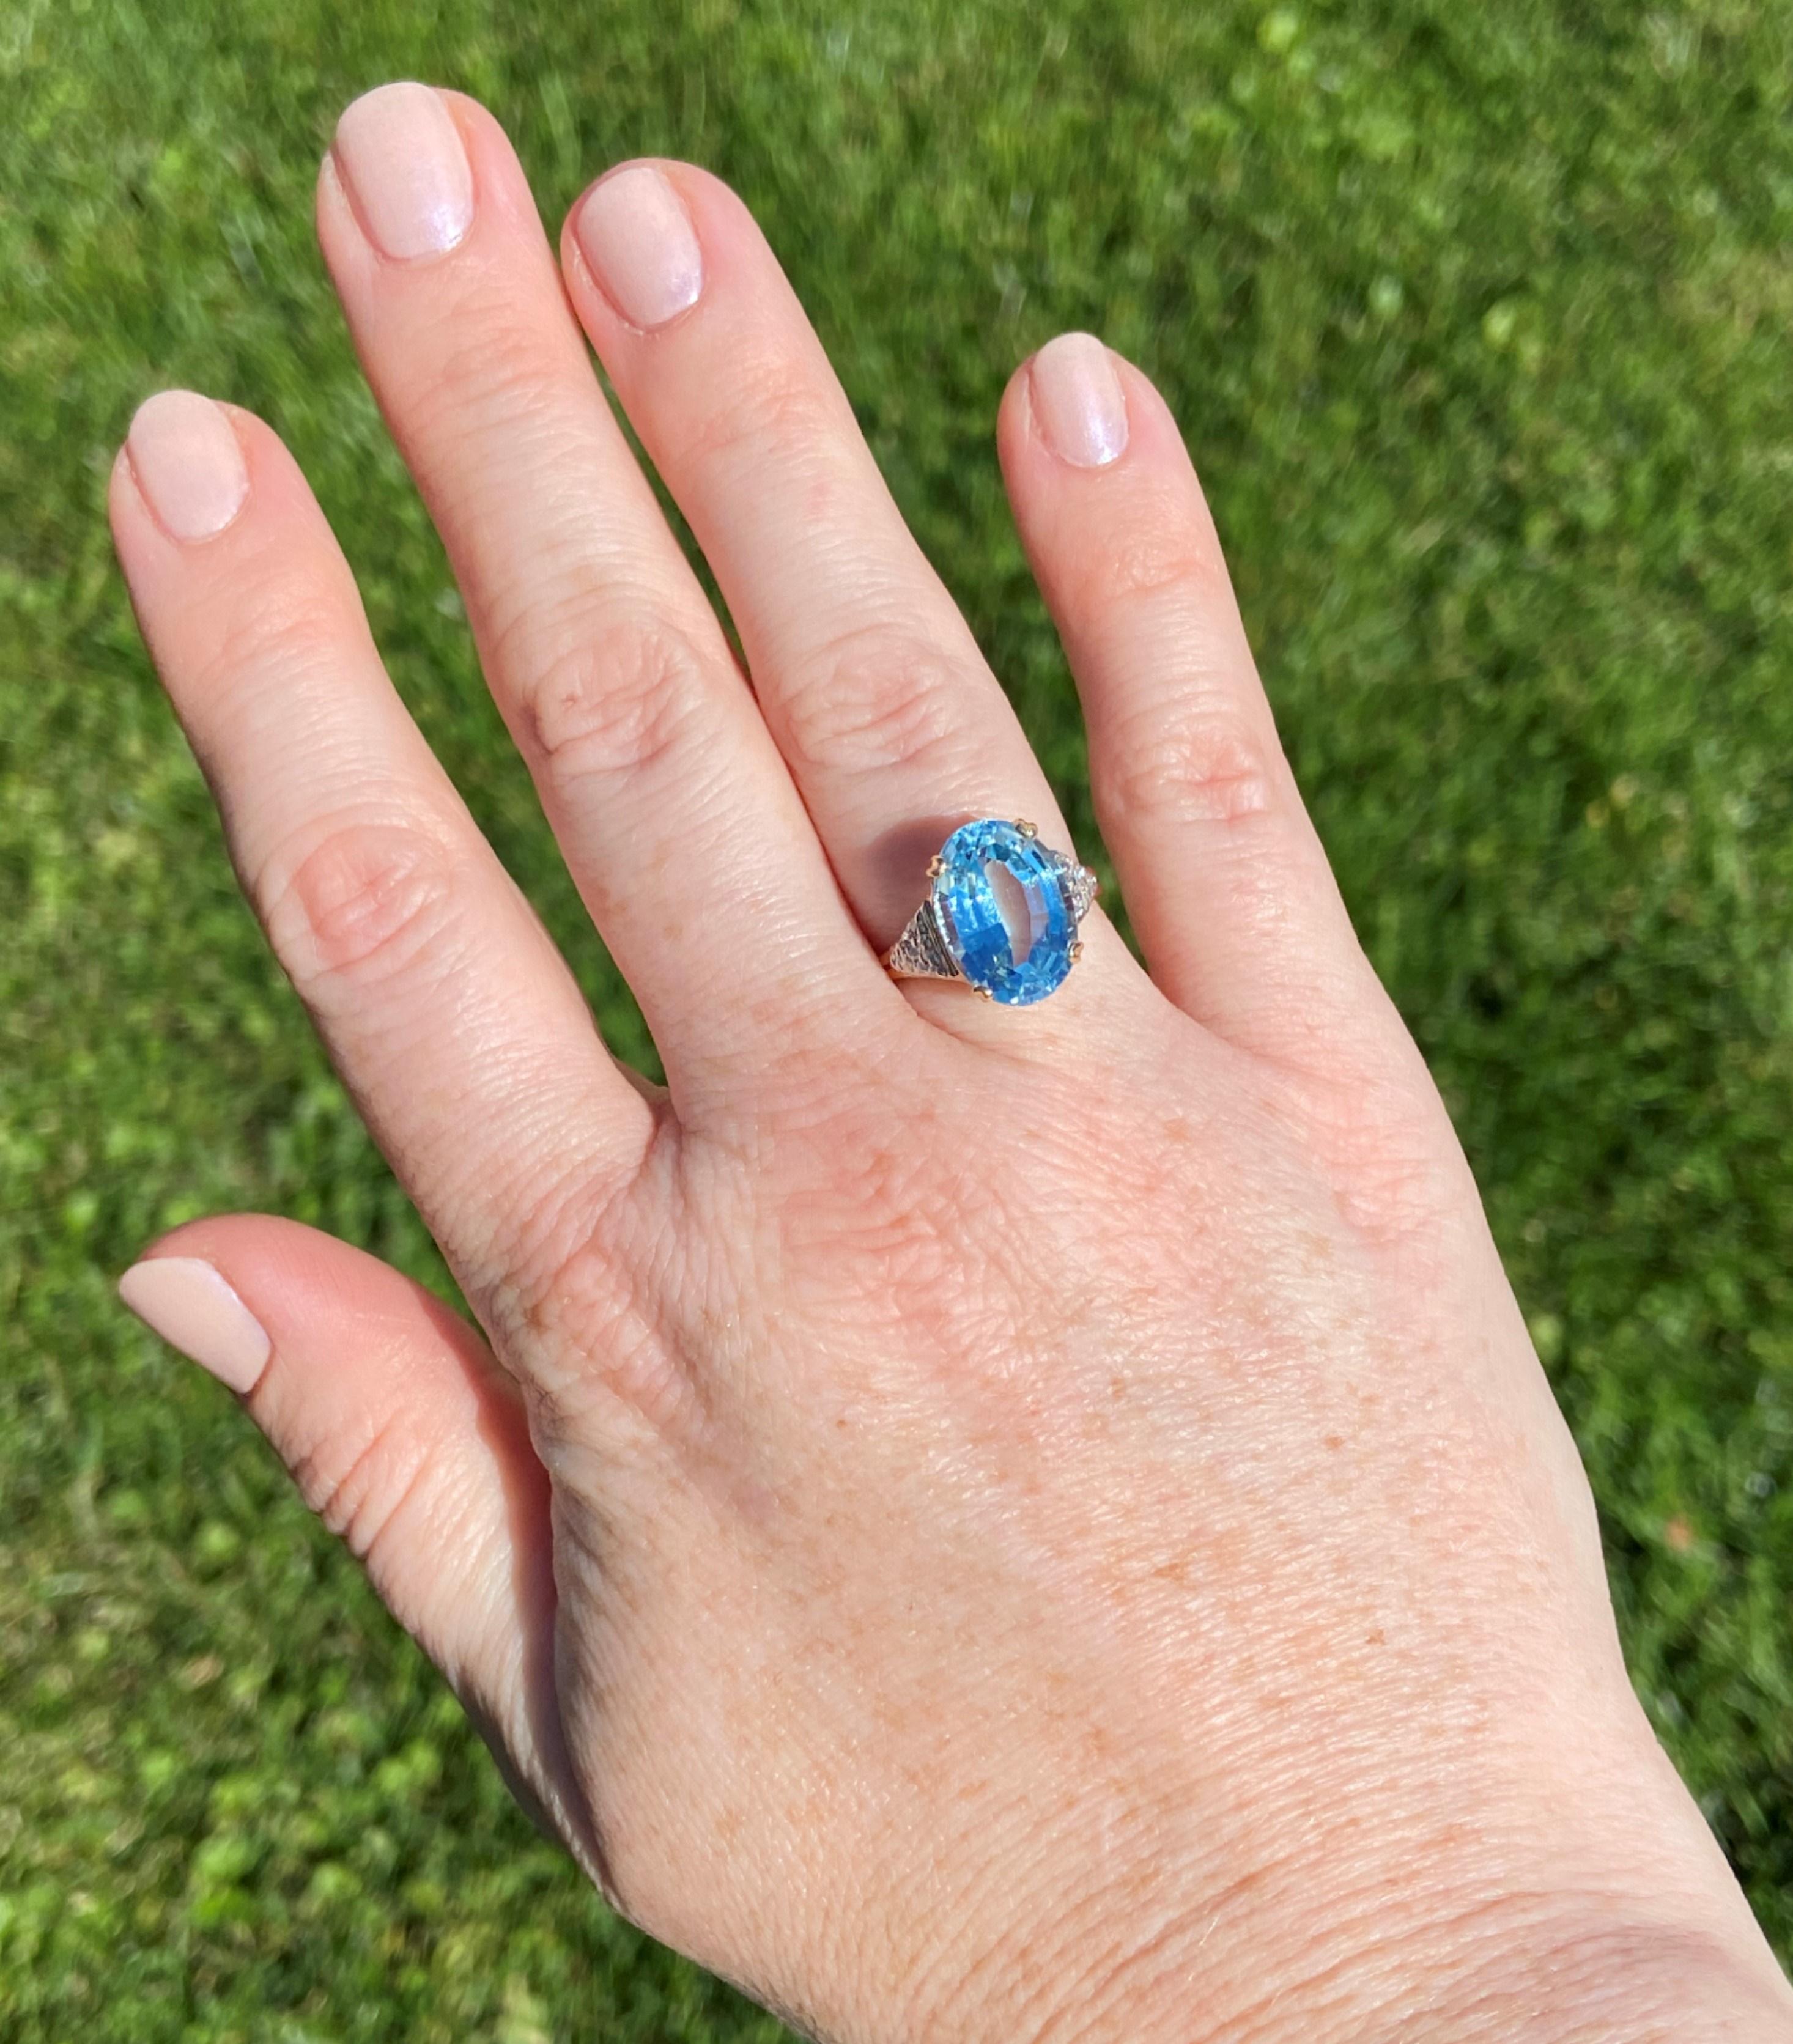 A stunning 6.22ct oval cut sky-blue topaz sits proudly at the center of this gorgeous ring. On either shoulder is a triangle-shaped section of white gold set with .05tcw H-I color, SI2-SI1 clarity diamonds for some added sparkle. The color of this